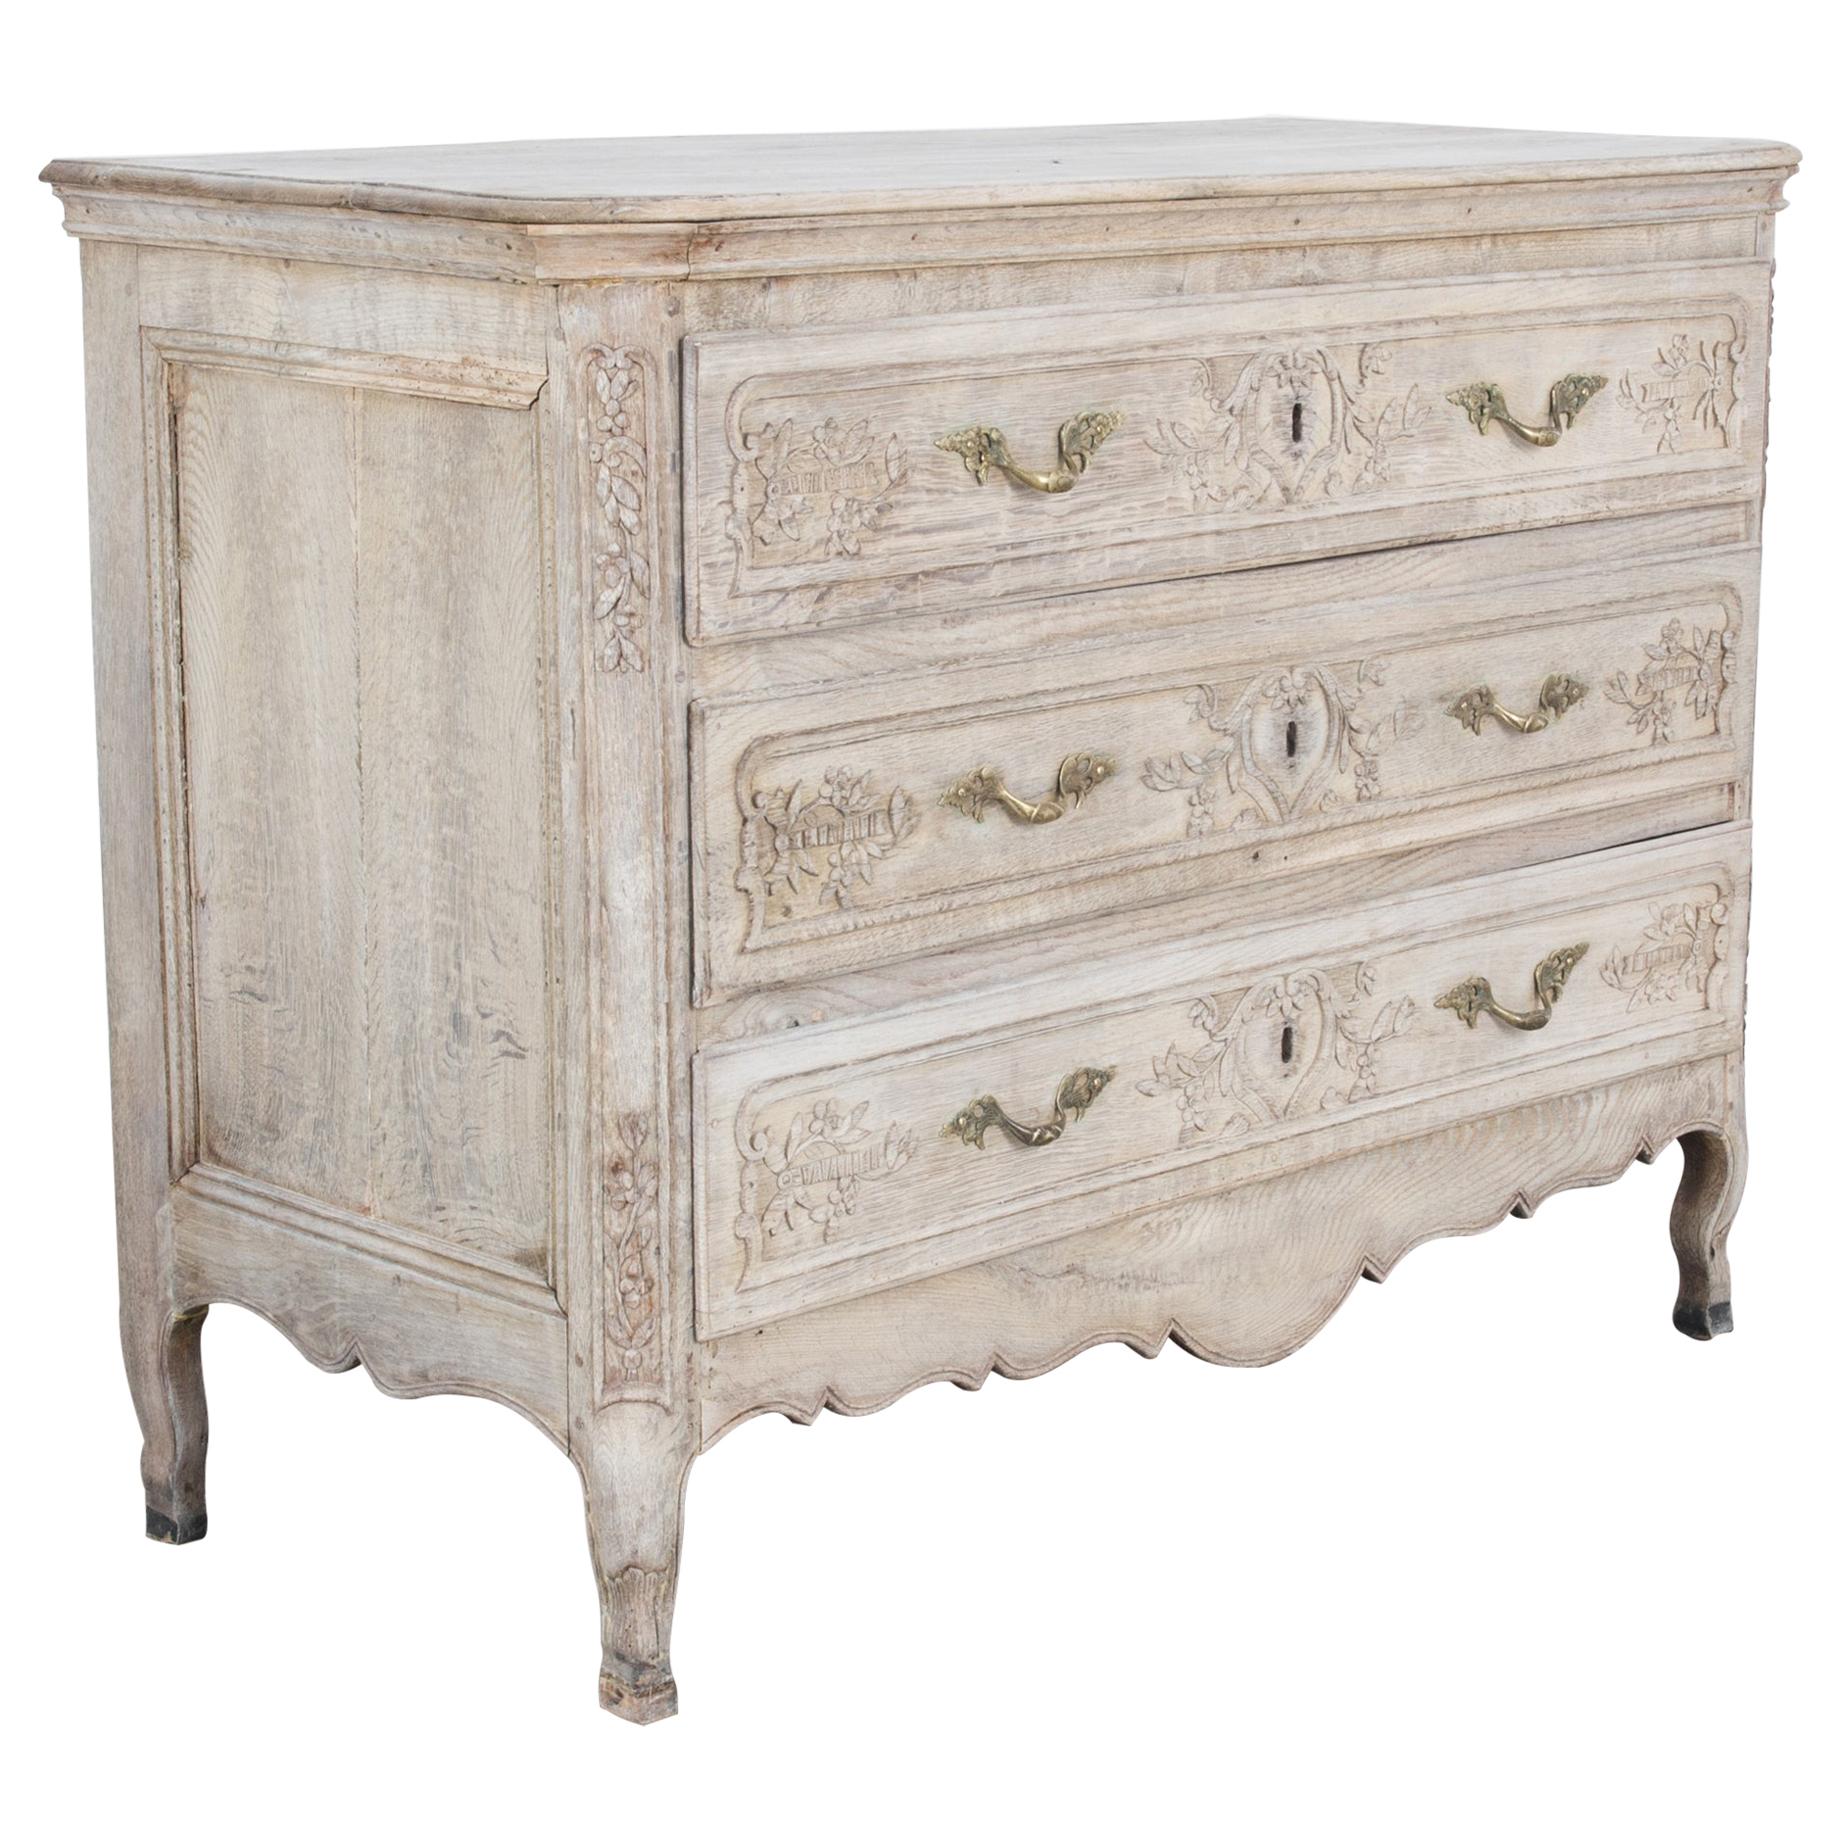 1880s French Bleached Oak Chest of Drawers